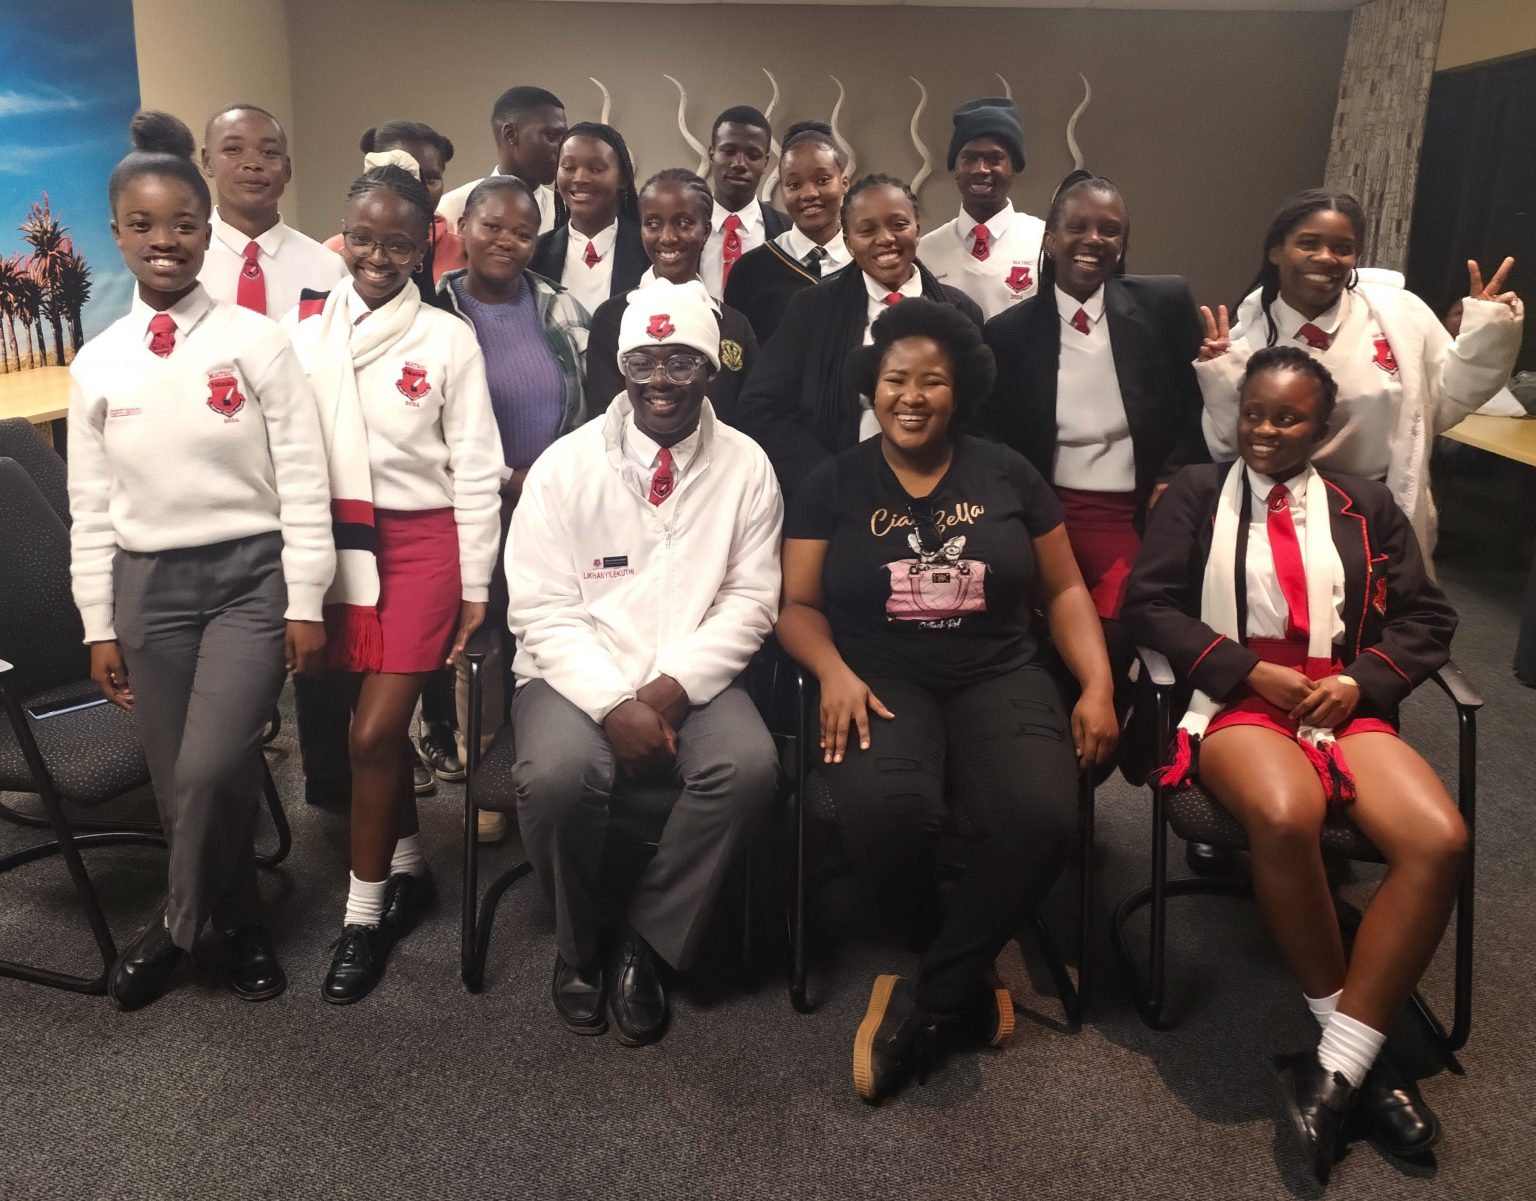 Sixteen Ntsika and Nyaluza High Schools learners pose with Inkululeko’s Nosi Dosi after the podcast on 27 February in the Africa Media Matrix at Rhodes University. Photo: Rod Amner